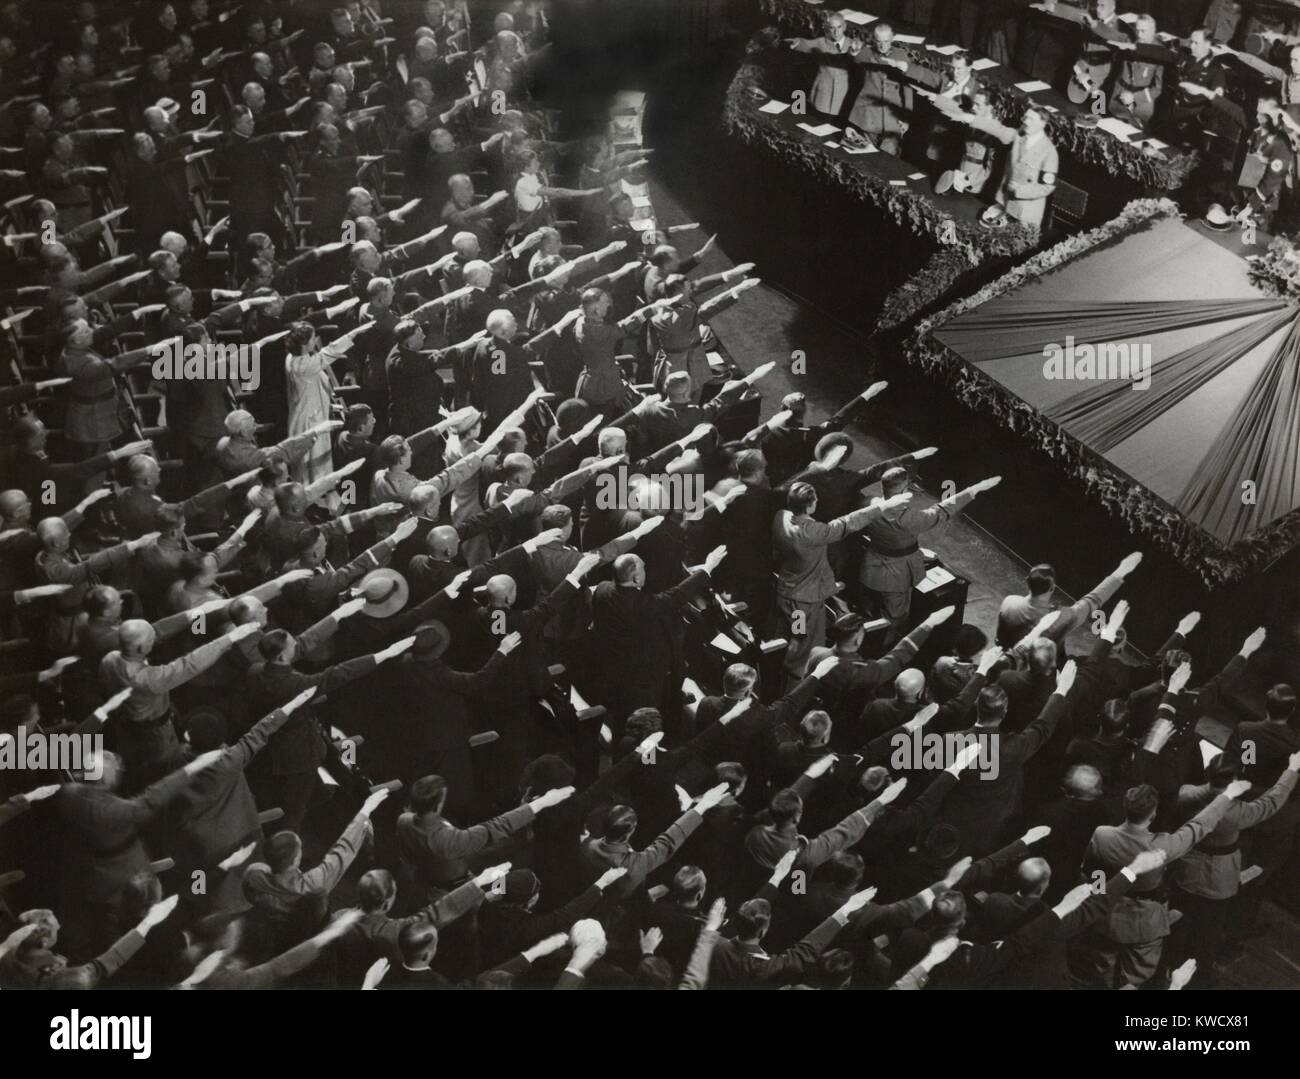 Attendees give Hitler the Nazi salute during the nation anthem, Oct. 9, 1935. They were meeting at the Kroll Opera in Berlin, to organize the Winter Relief festive to help finance charitable work (BSLOC 2017 2 69) Stock Photo